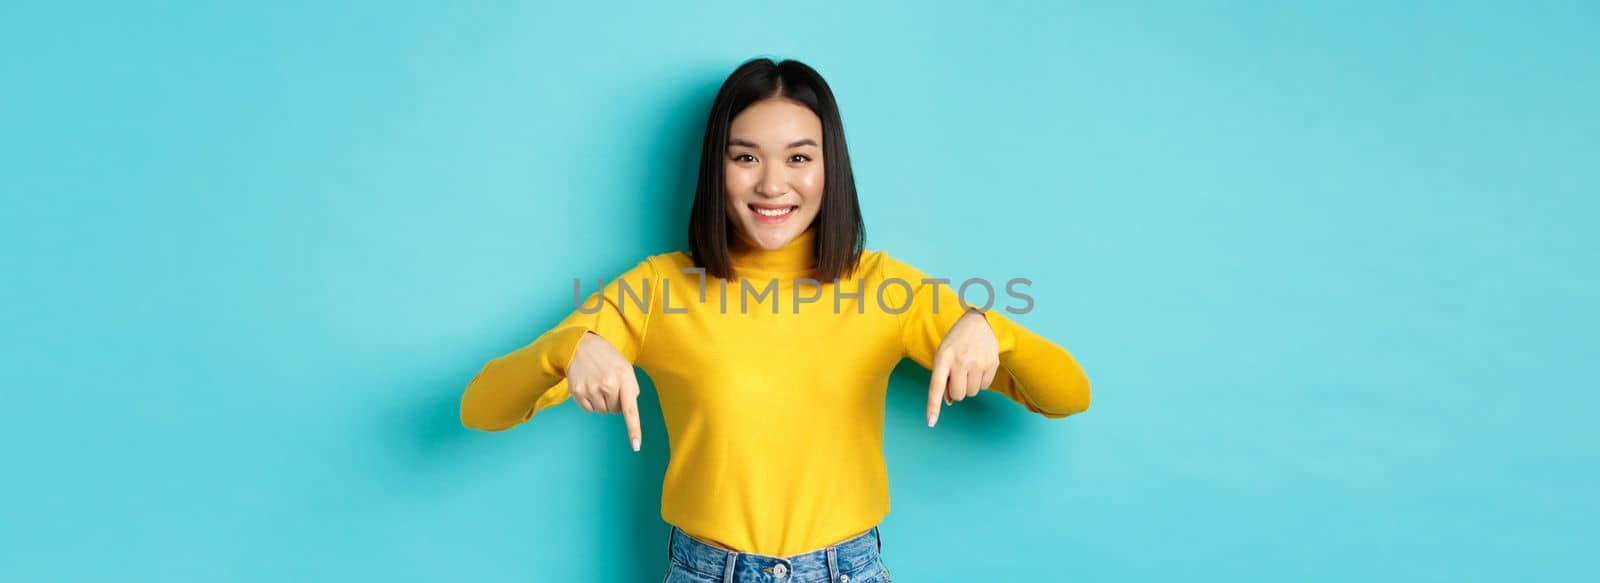 Shopping concept. Beautiful korean girl with happy smile, pointing fingers down at banner, standing against blue background.